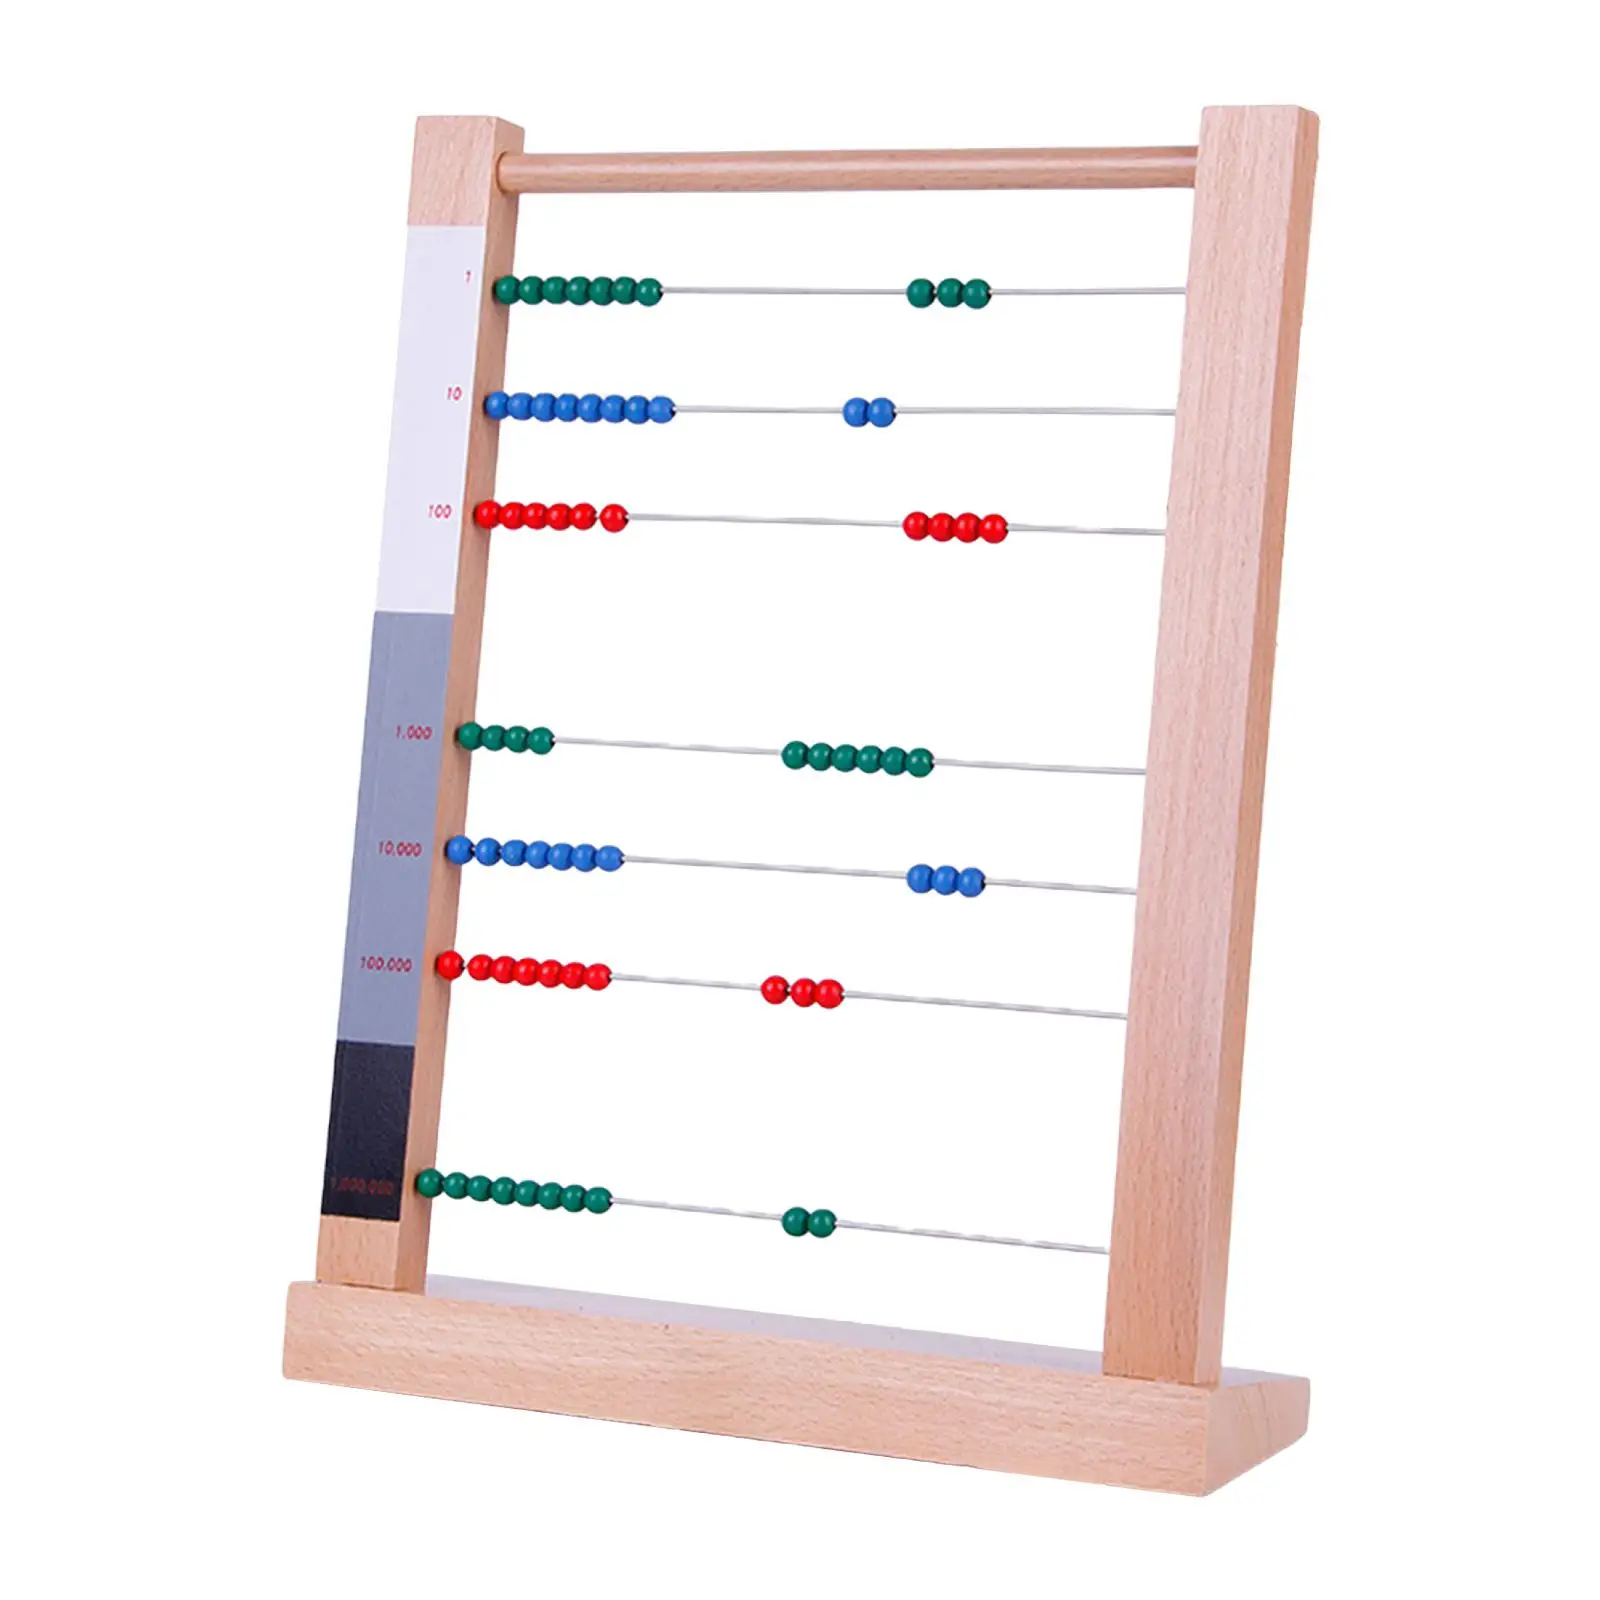 7 Rows Counting Frame Number Learning Educational Toy Mathematics Abacus for Kindergarten Preschool Toddlers Children Elementary